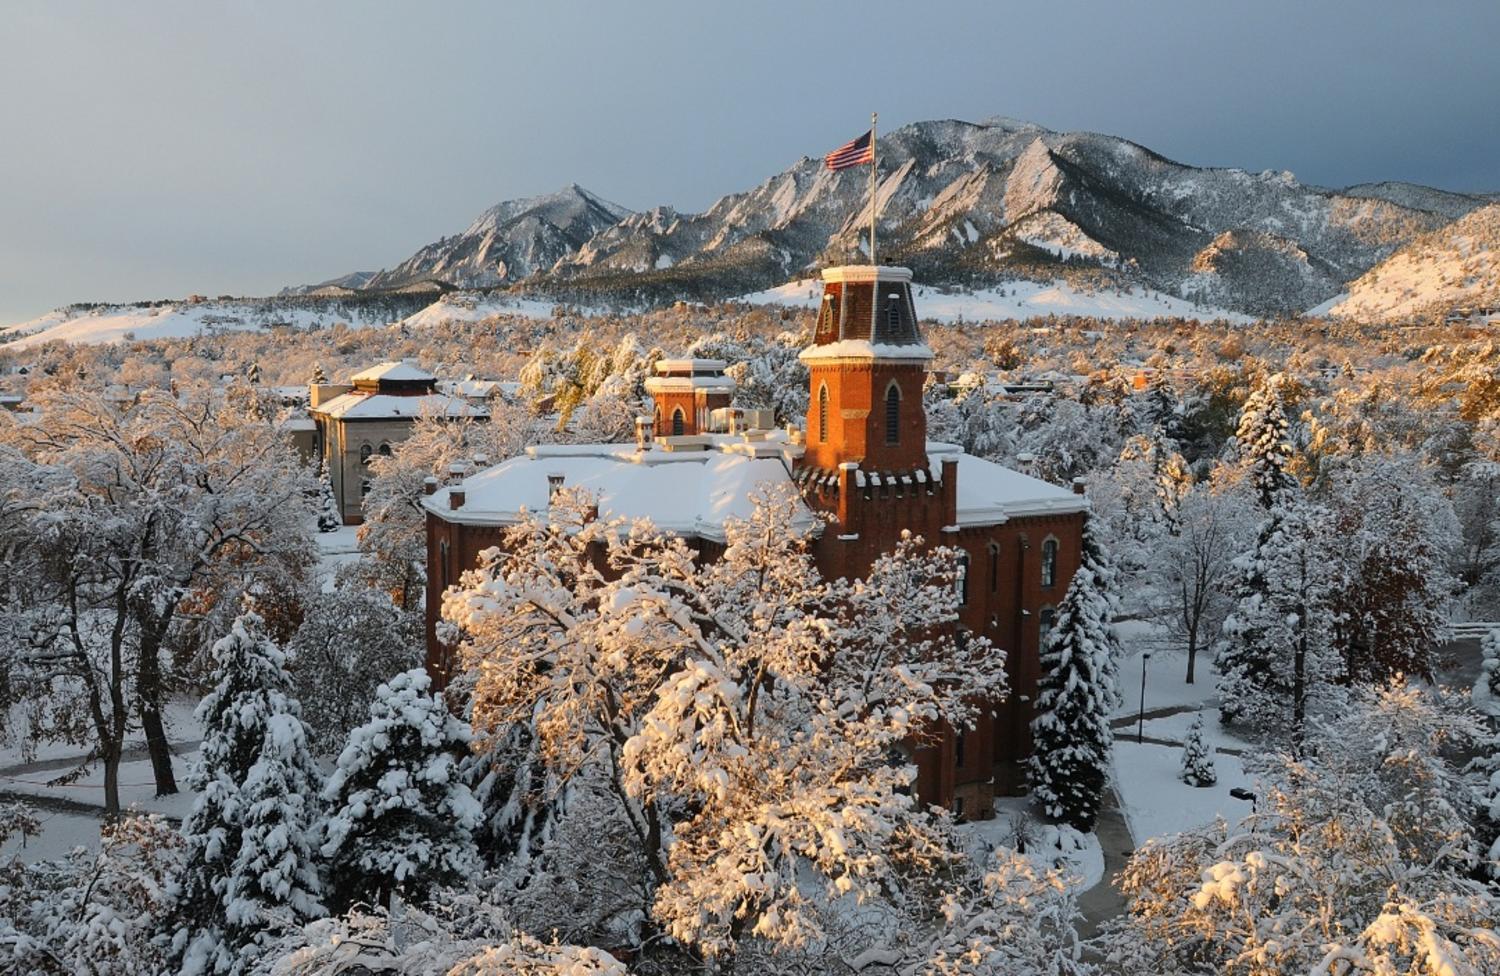 
          The majestic, snow-covered Flatirons is a breathtaking backdrop with Old Main at the University of Colorado Boulder in the foreground. (Photo by Casey A. Cass/University of Colorado)
        